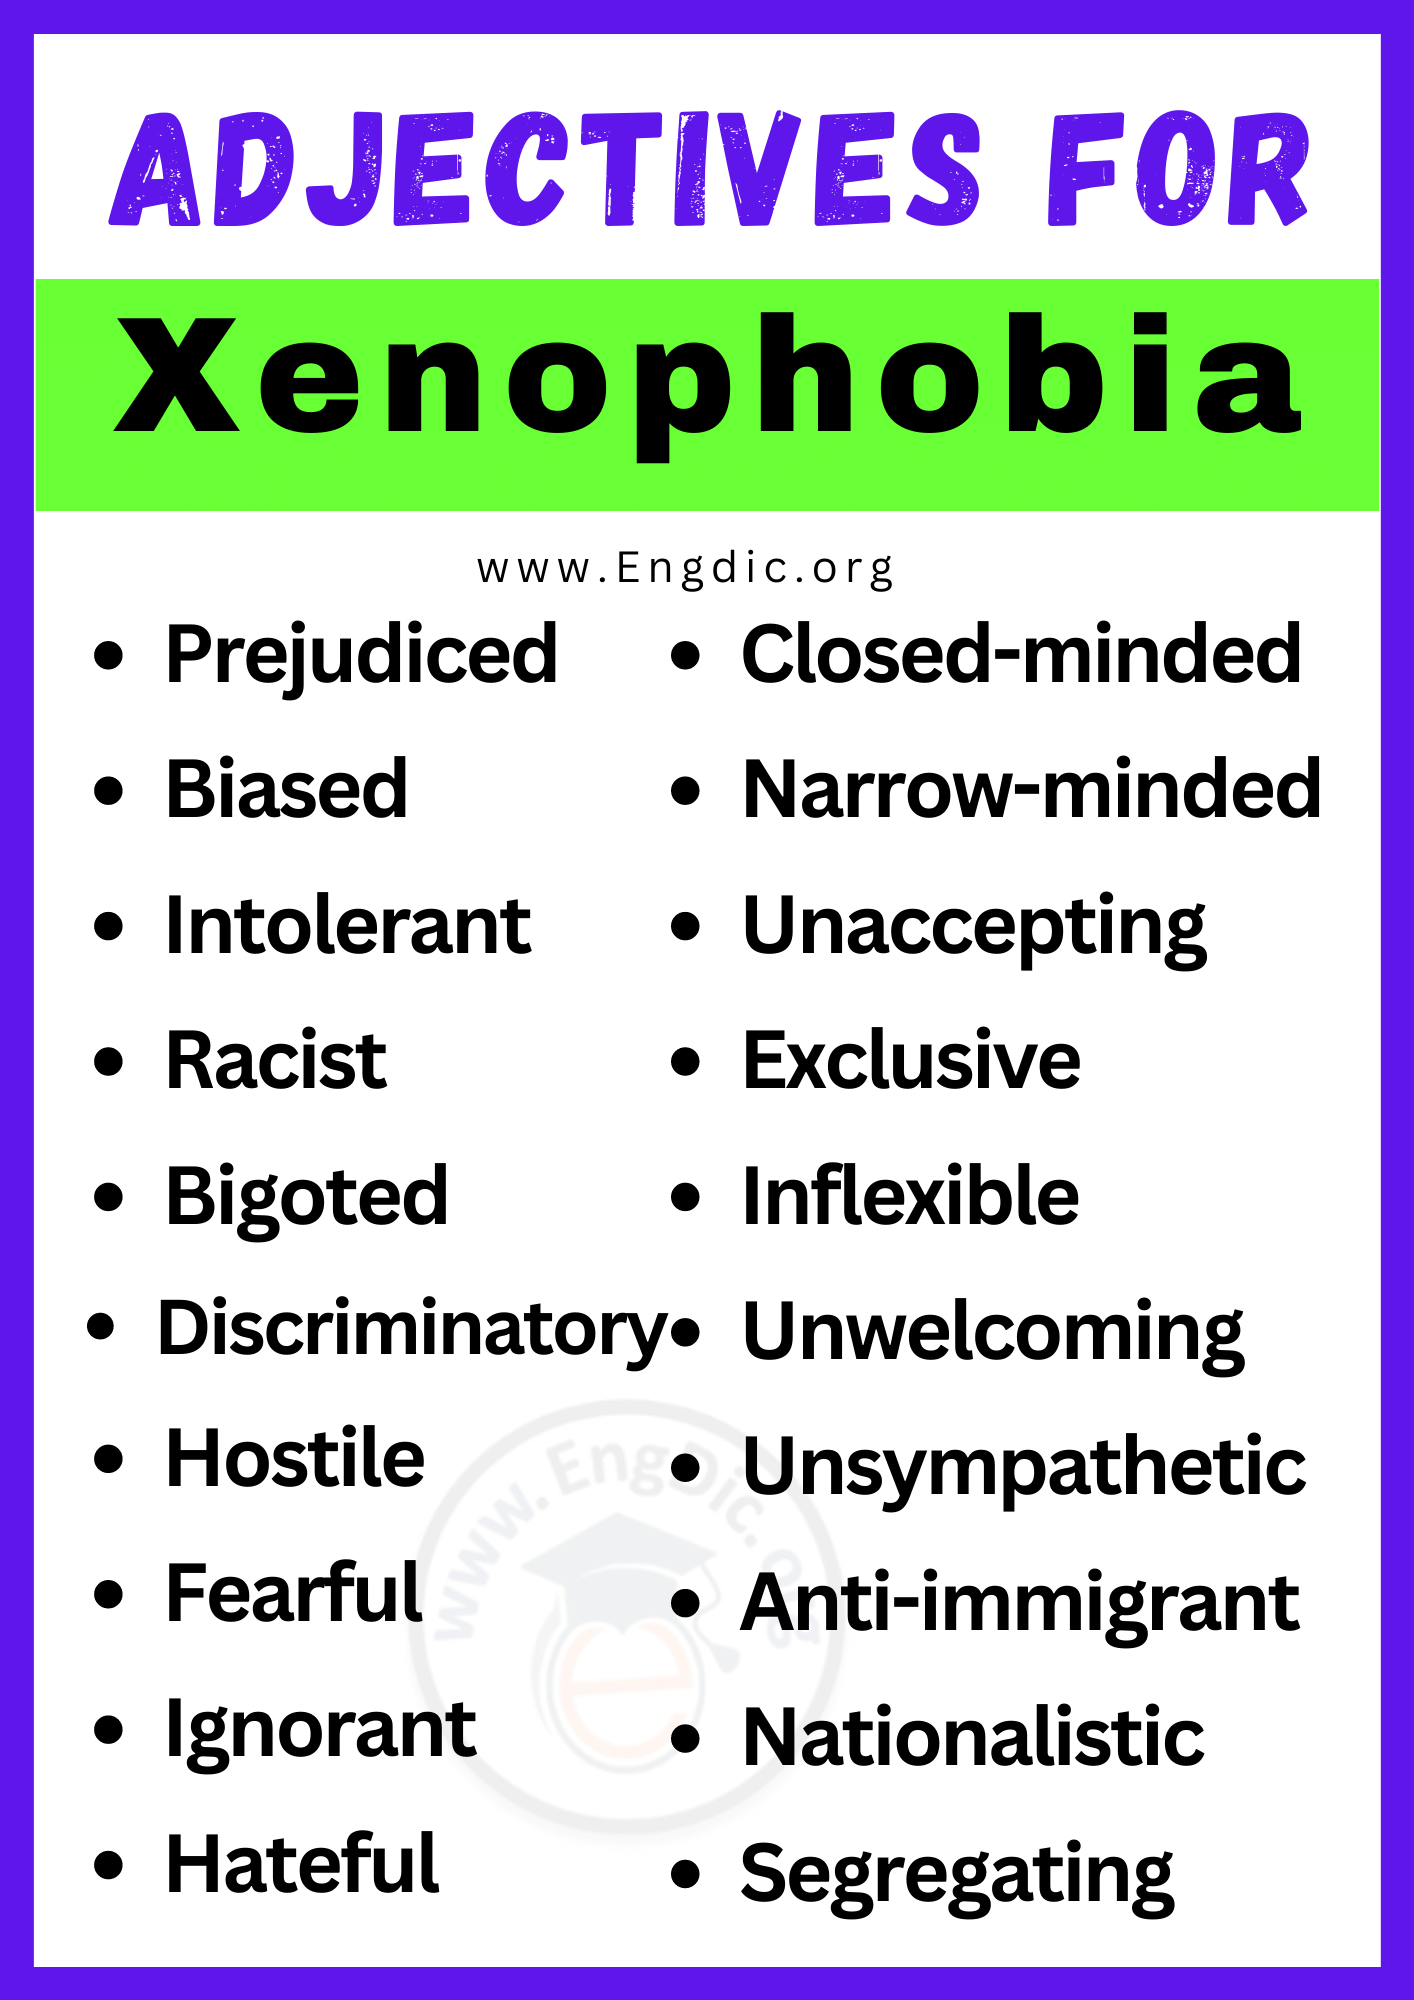 Adjectives for Xenophobia